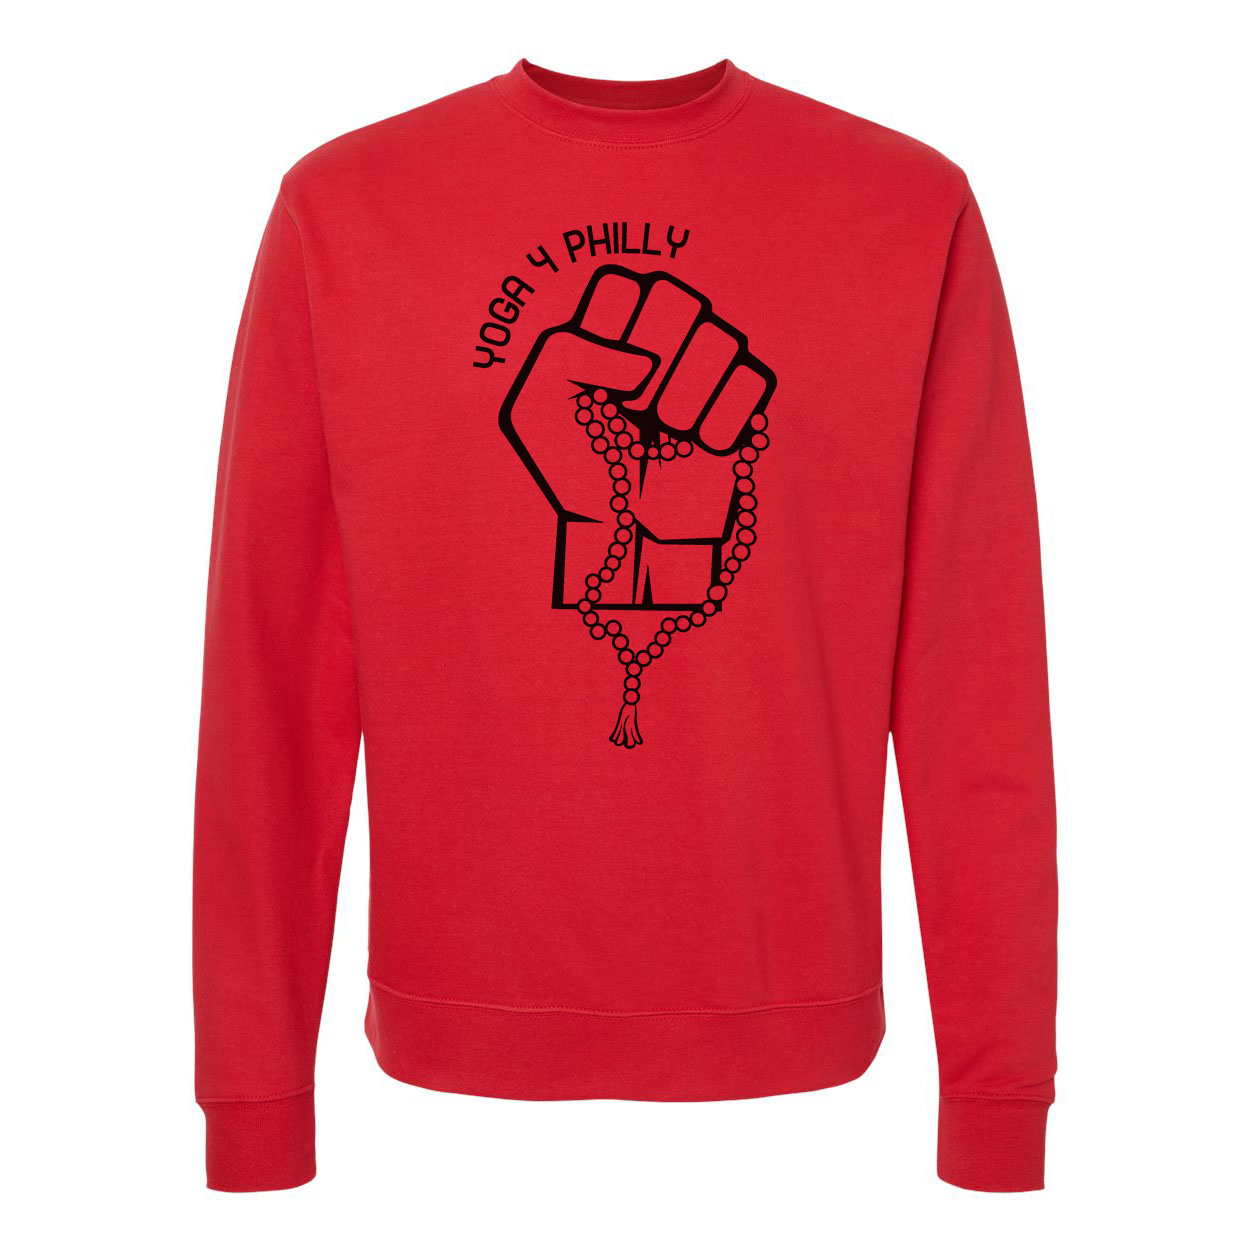 Yoga4Philly Midweight Red Crewneck